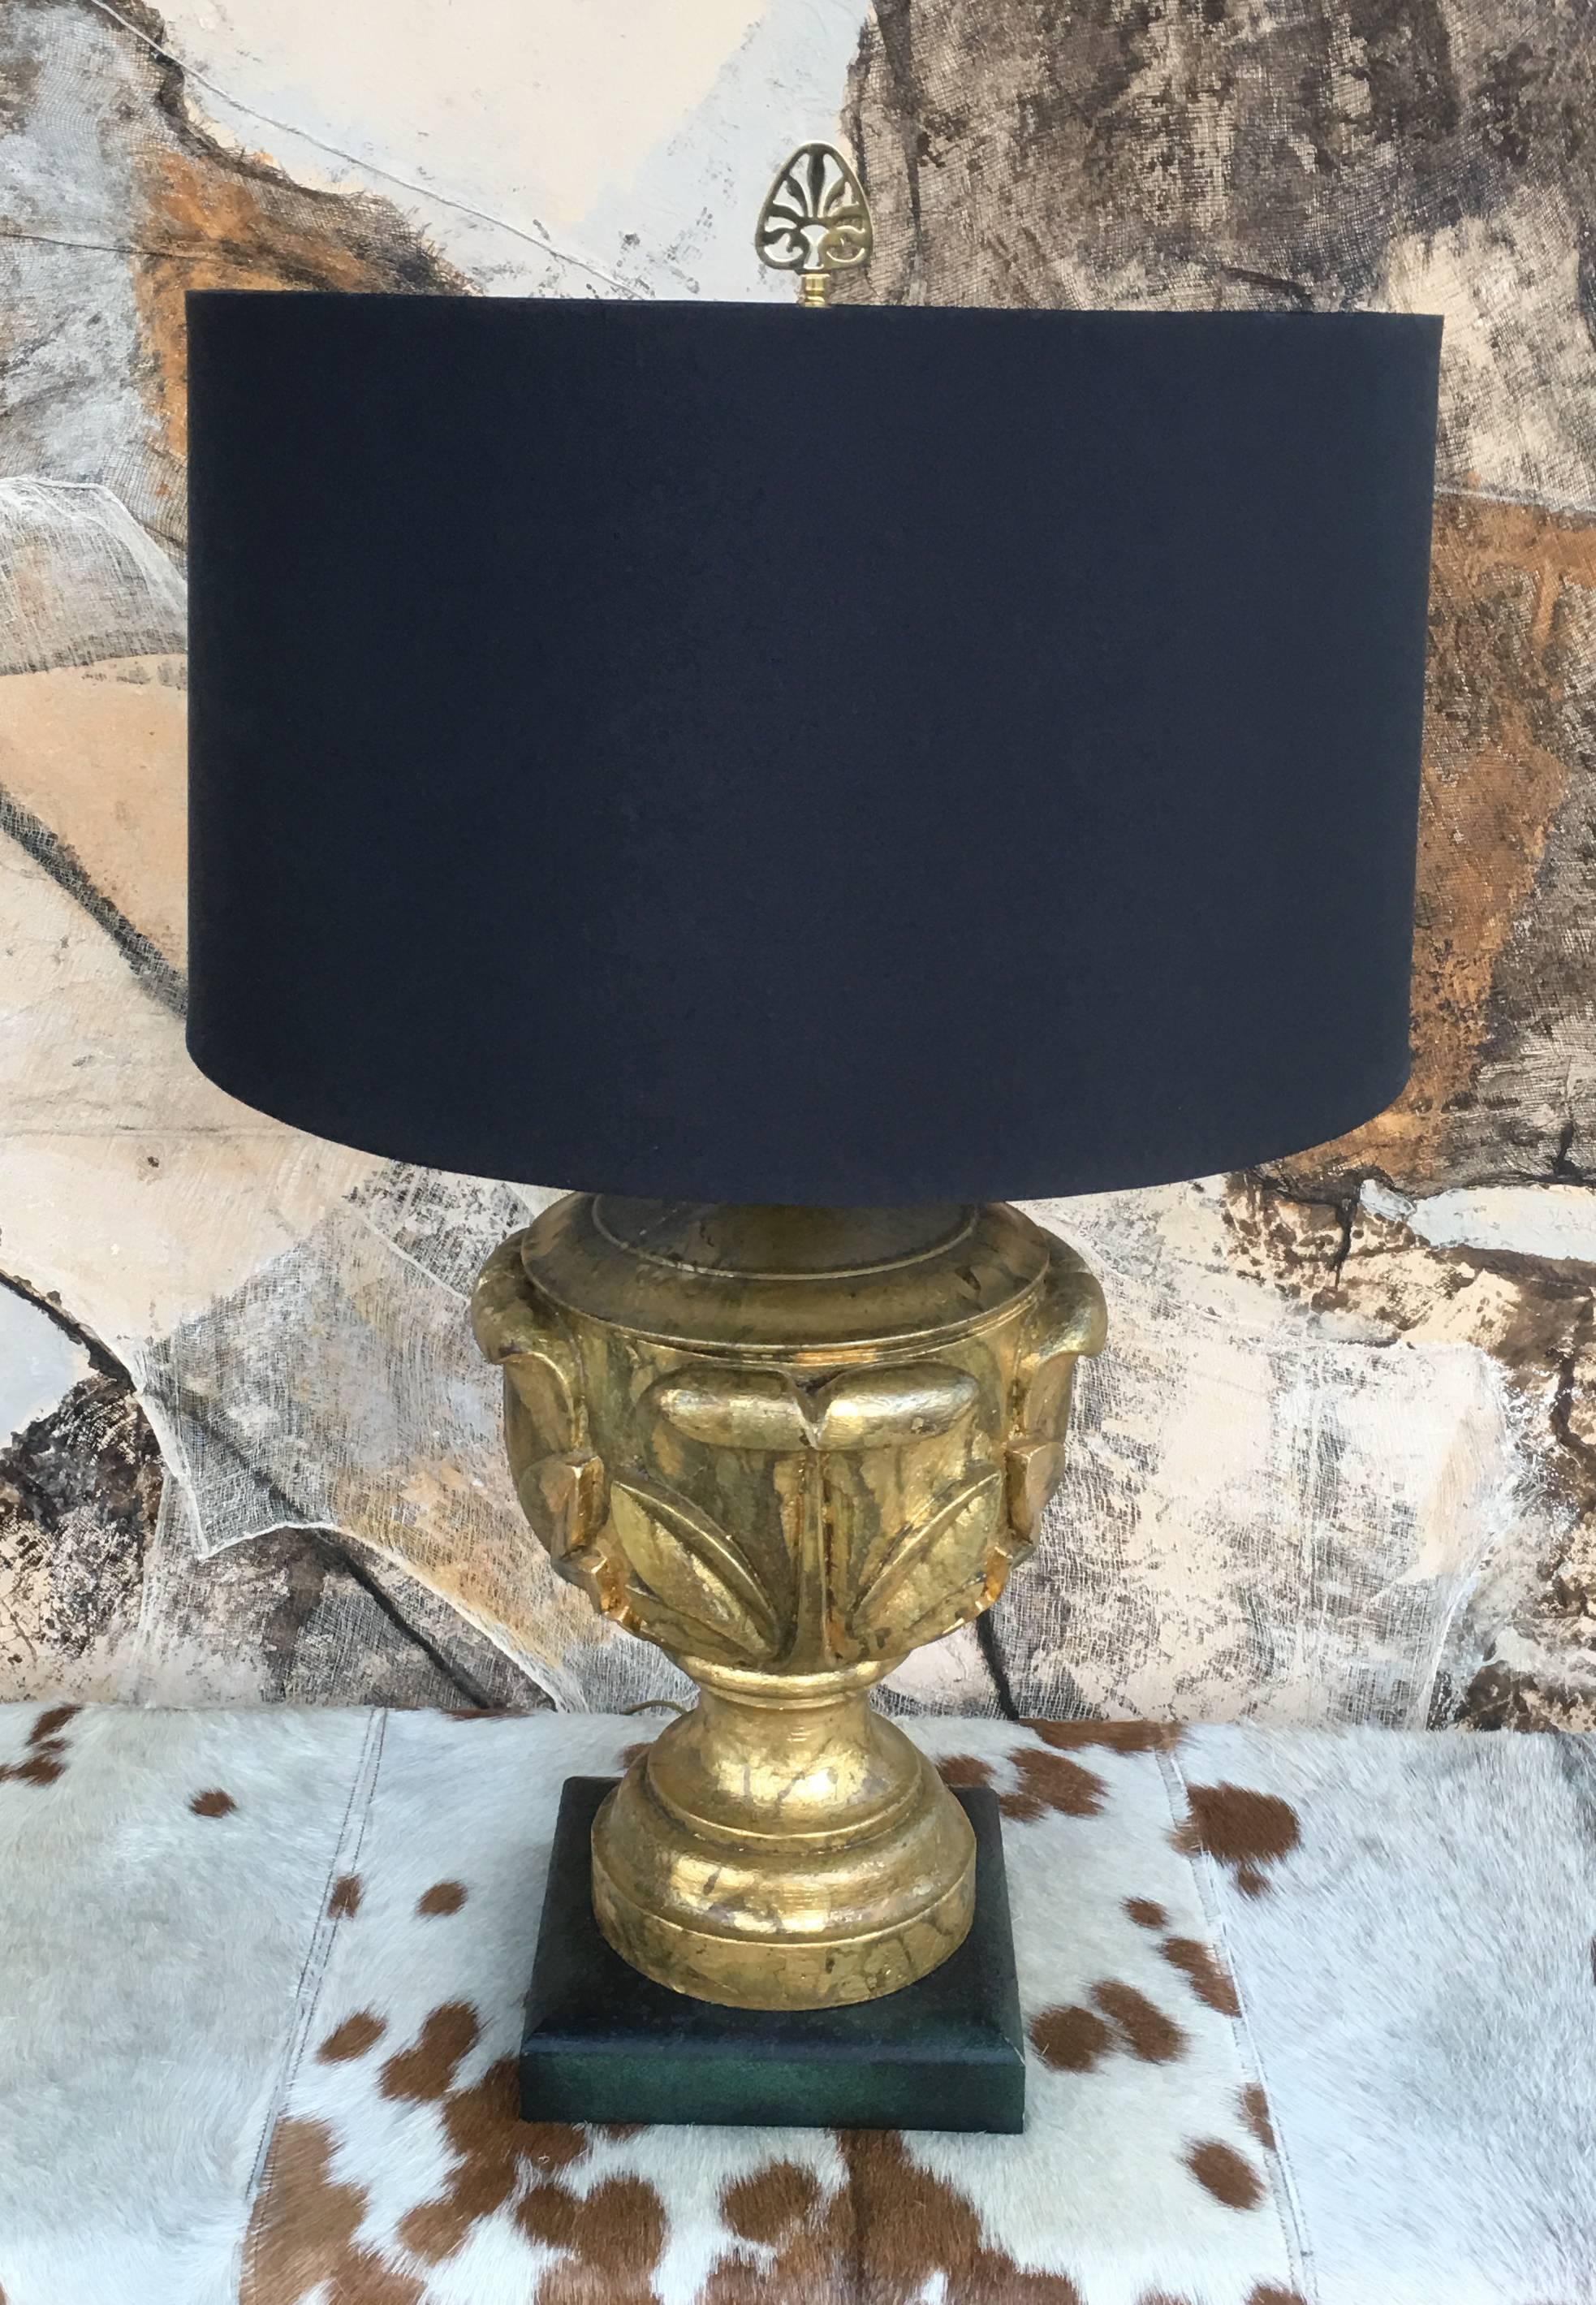 An extremely chic lamp from a very upscale home in Beverly Hills, CA done in high end Hollywood Regency side. The lamps made in America in the 60s were so beautifully made. This example is also extremely timeless and chic. The lamp is a combination